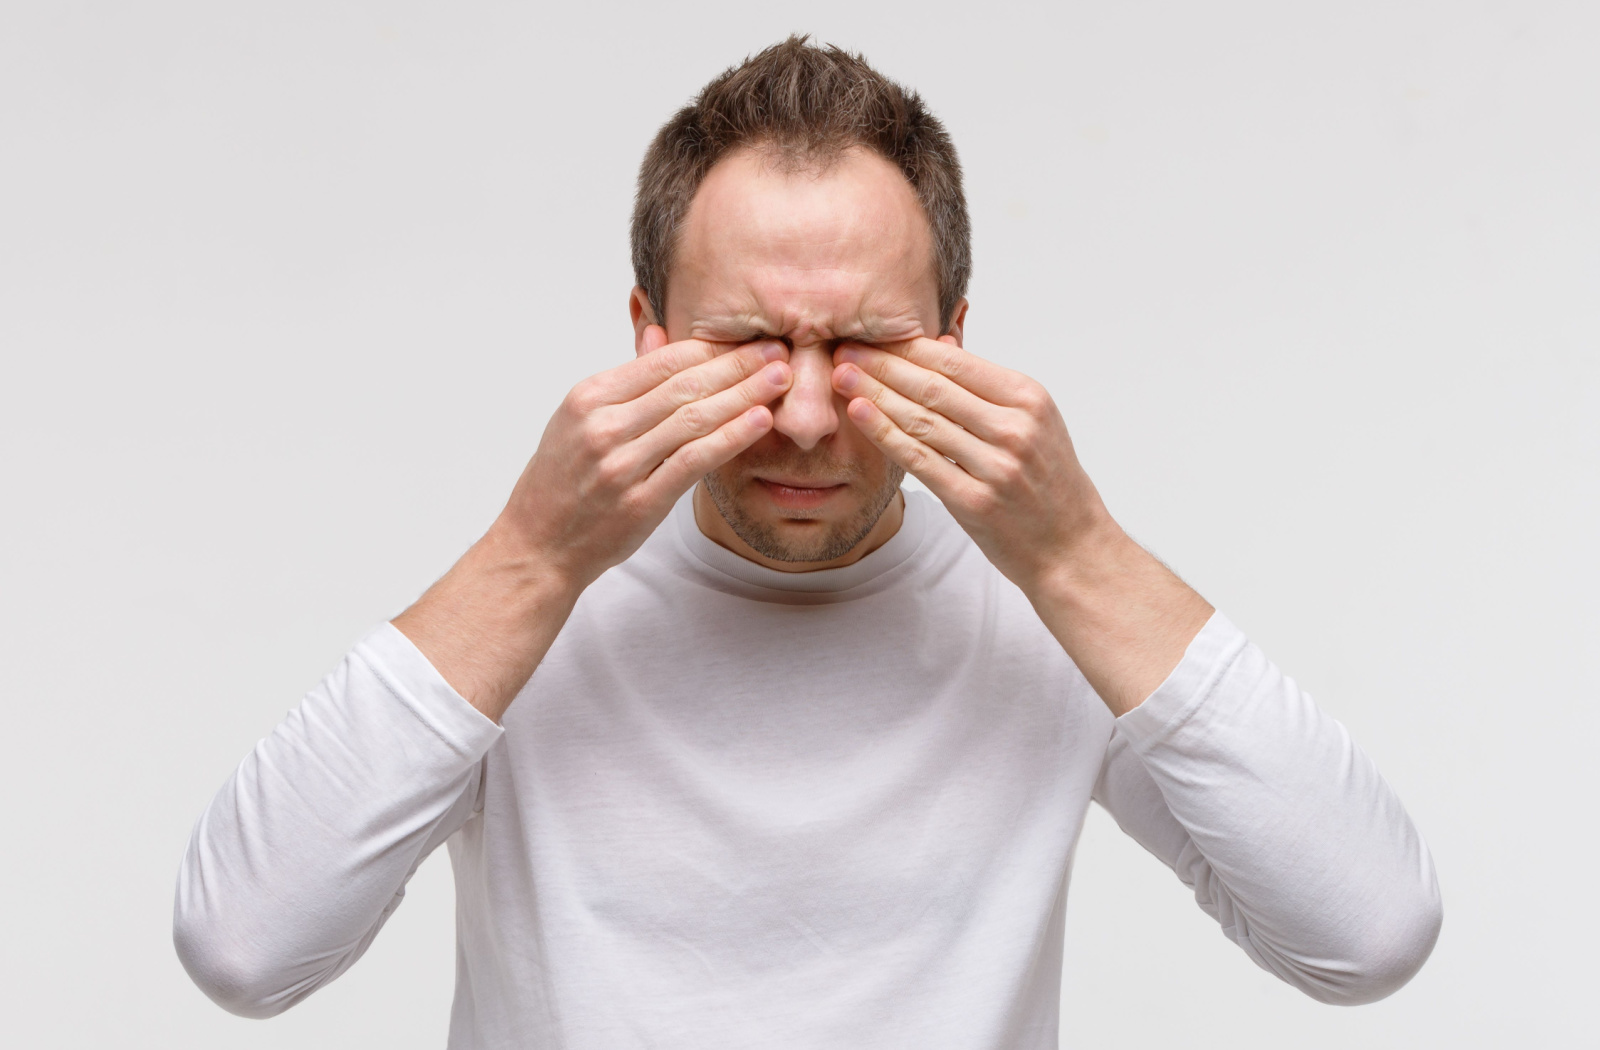 A middle-aged man rubbing his eyes with both hands